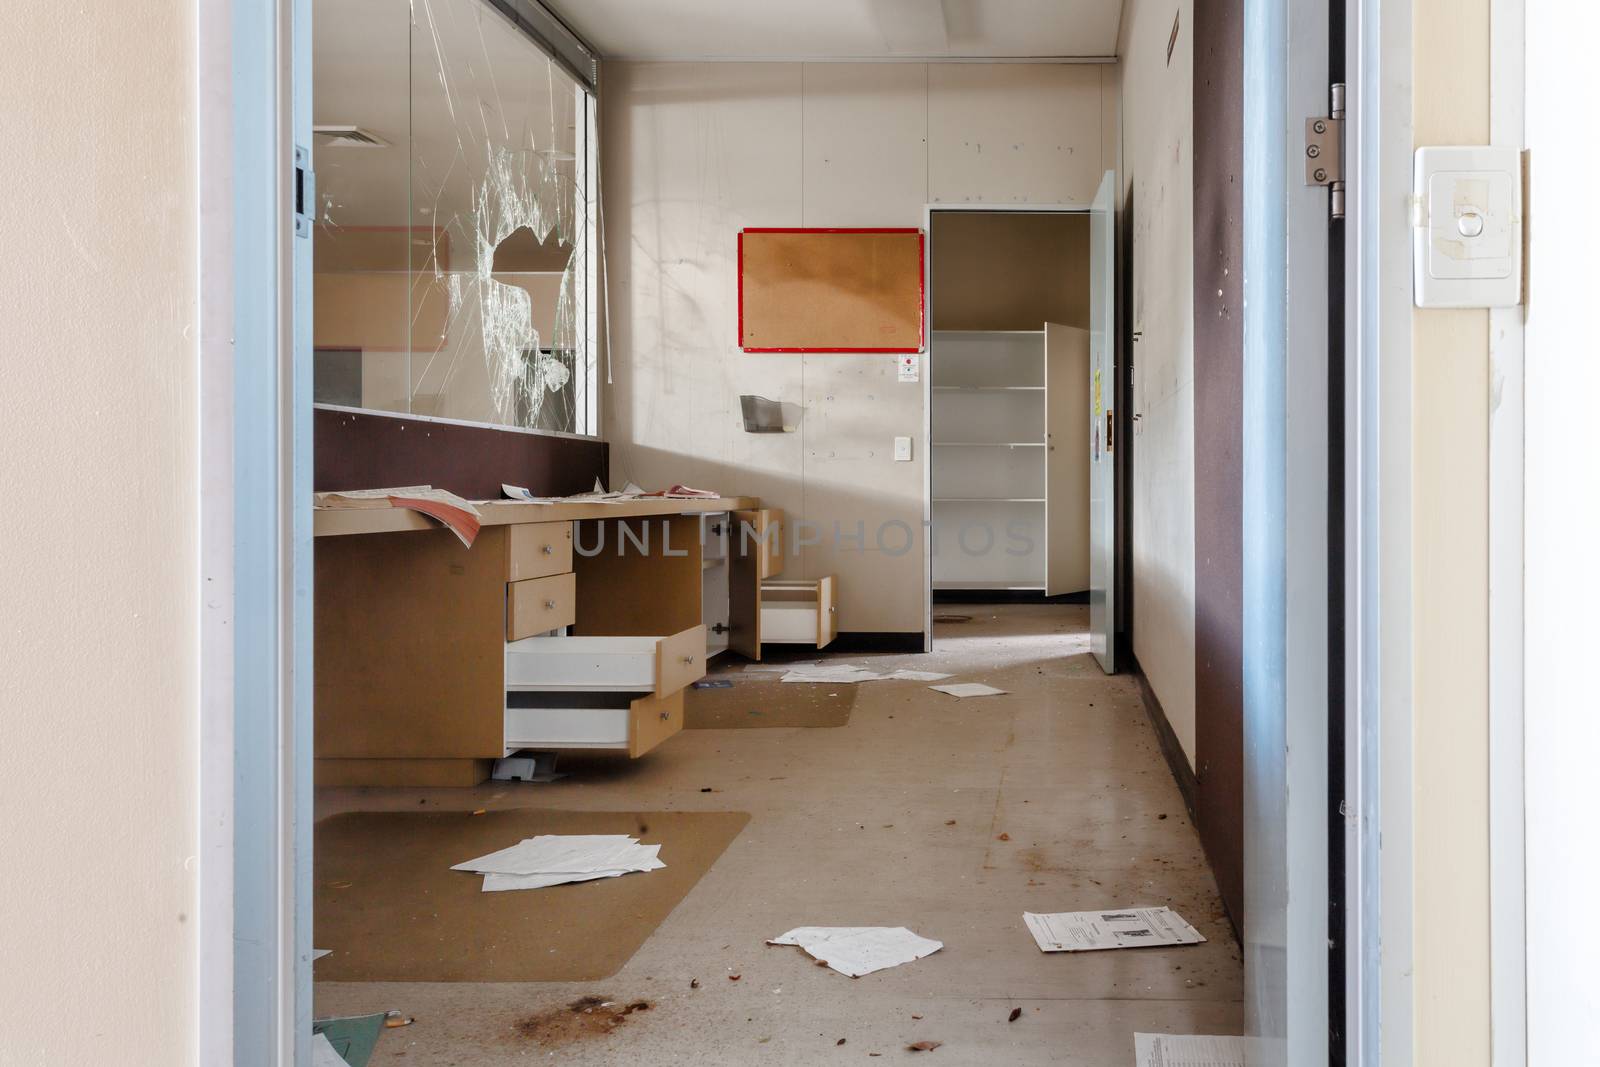 Vandalised office reception area of abandoned building by lovleah